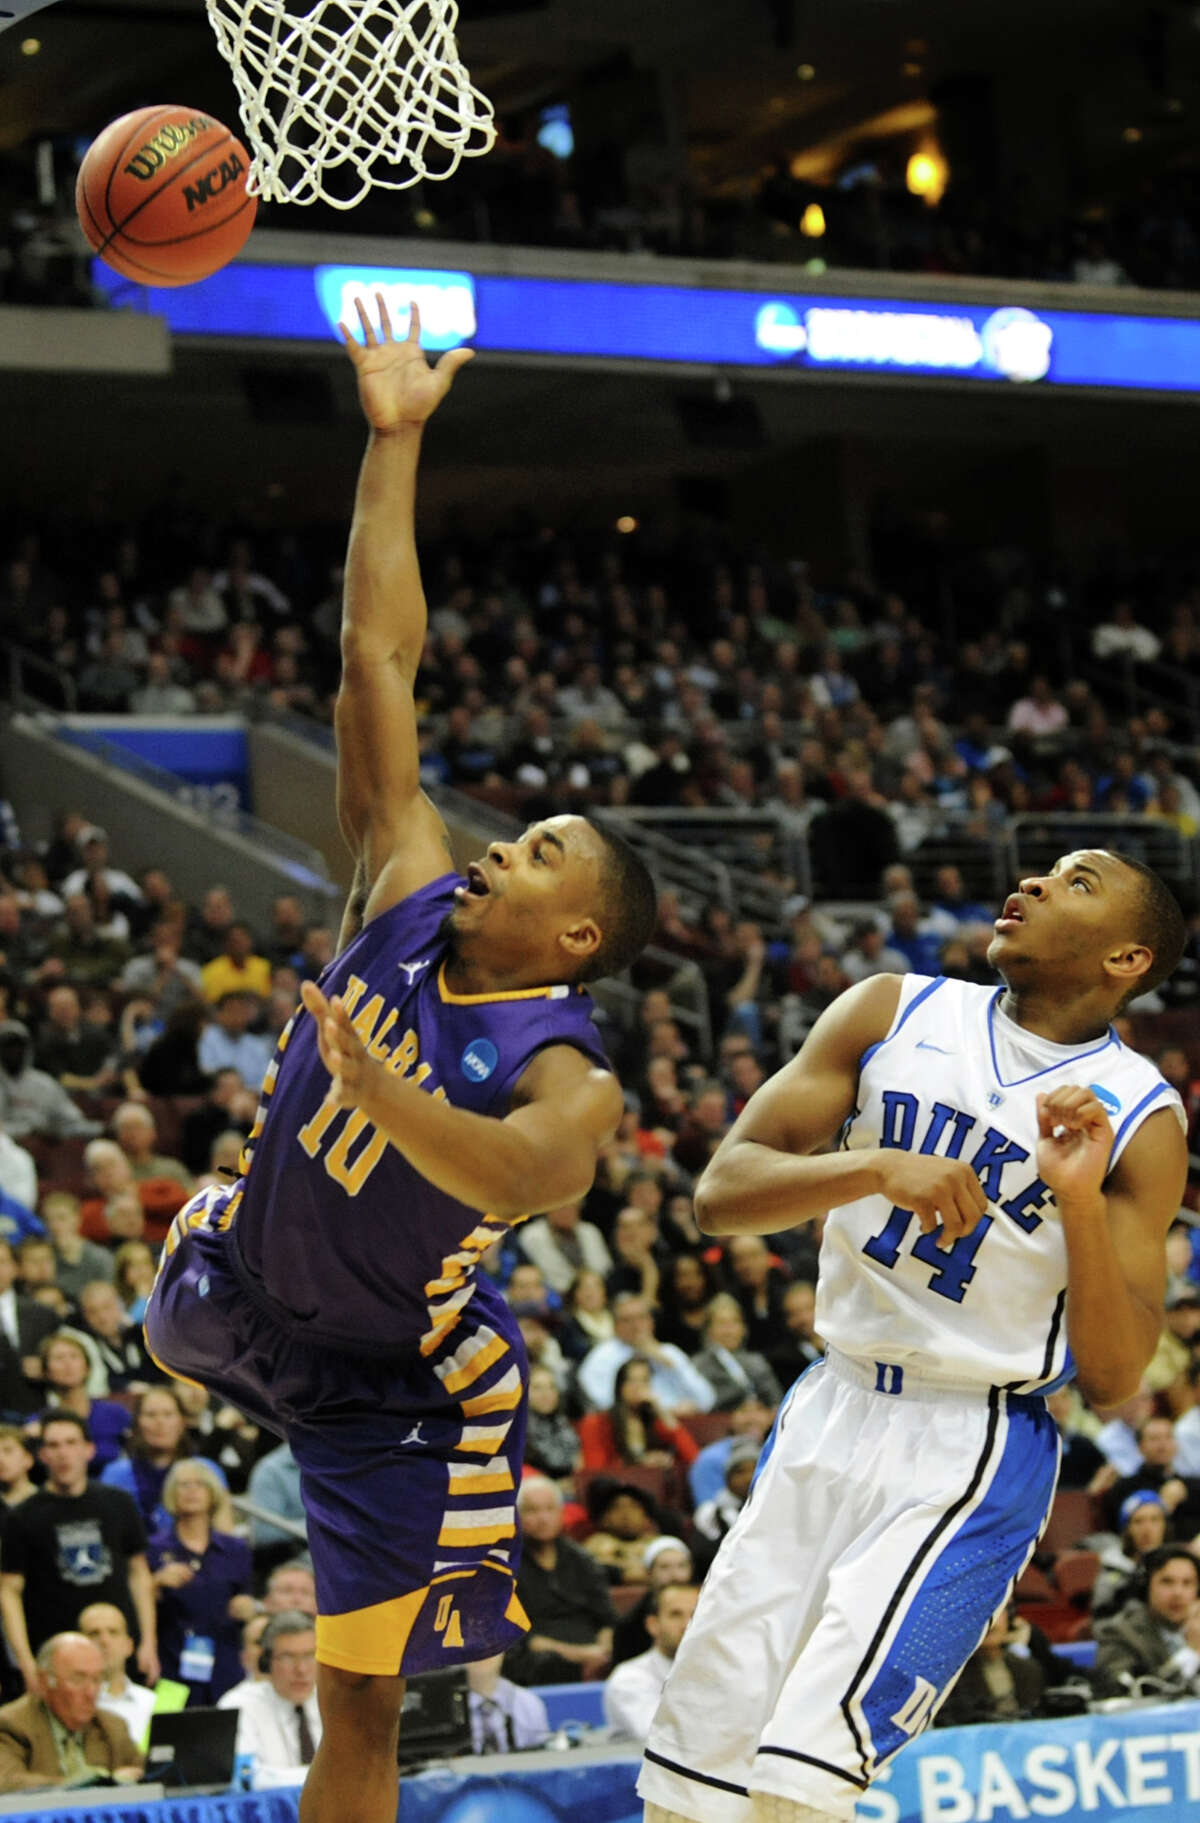 UAlbany's Mike Black, left, shoots for the hoop as Duke's Rasheed Sulaimon defends in the second round NCAA Tournament on Friday, March 22, 2013, at Wells Fargo Center in Philadelphia, Penn. (Cindy Schultz / Times Union)